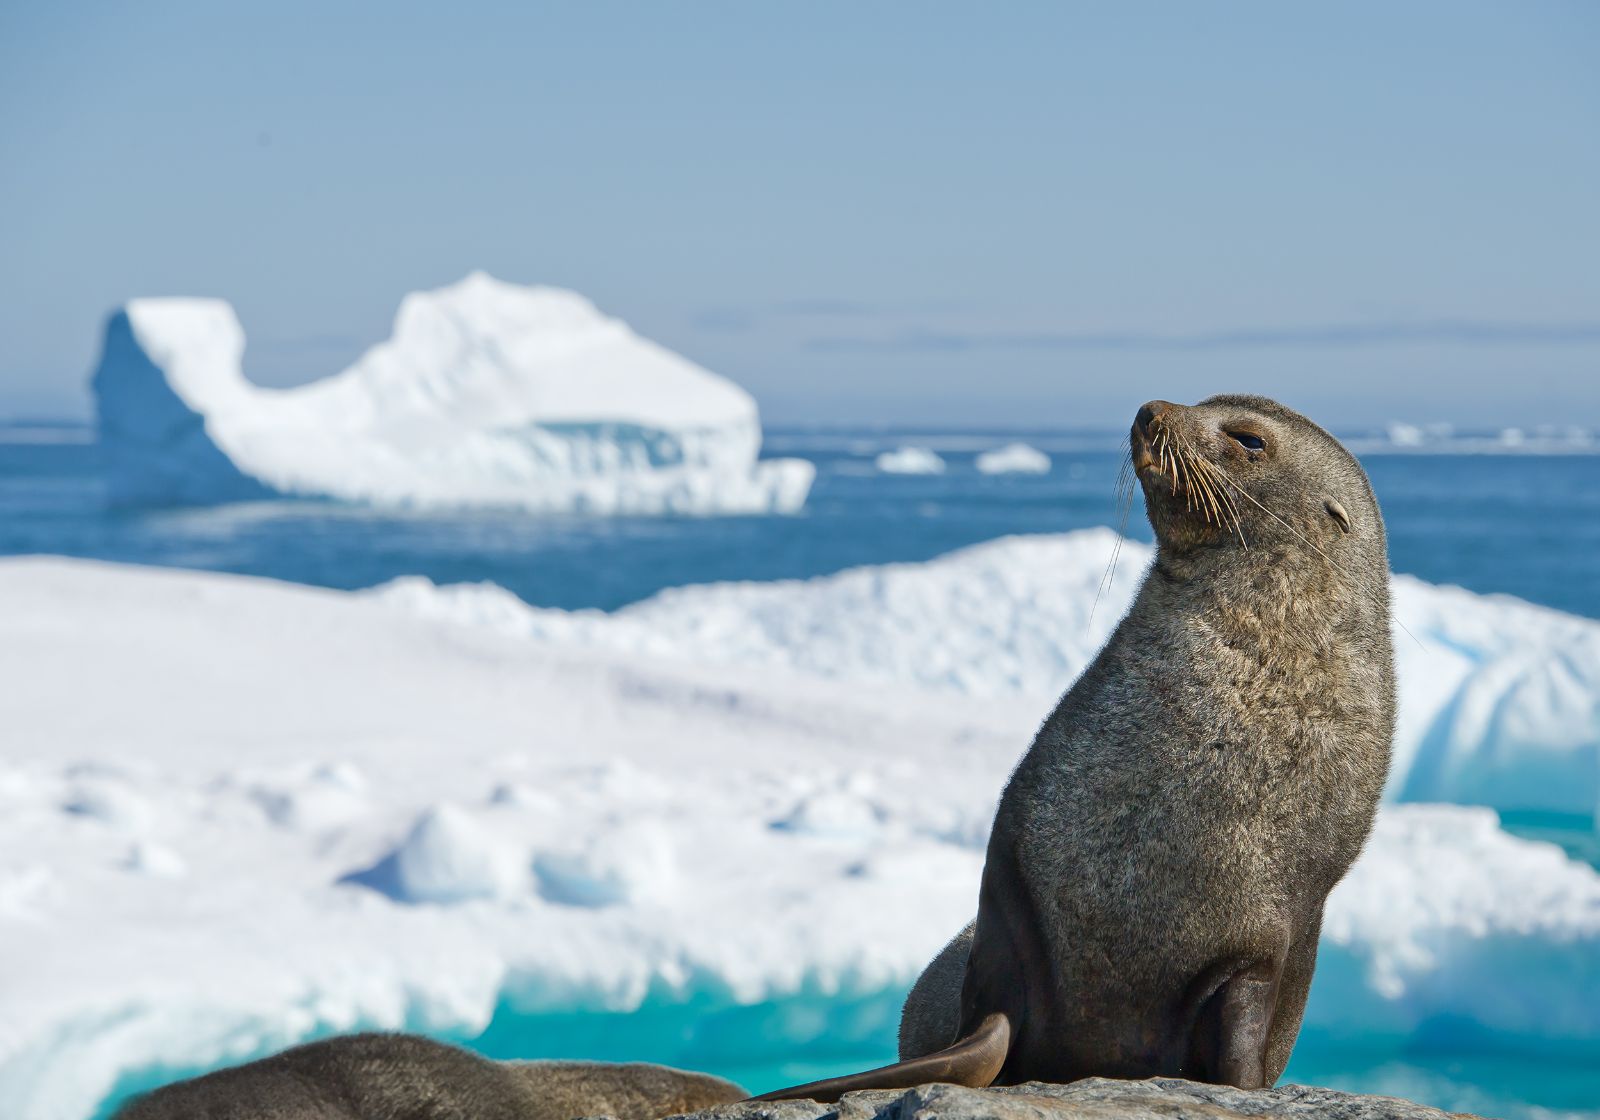 A seal spotted during an Antarctic expedition